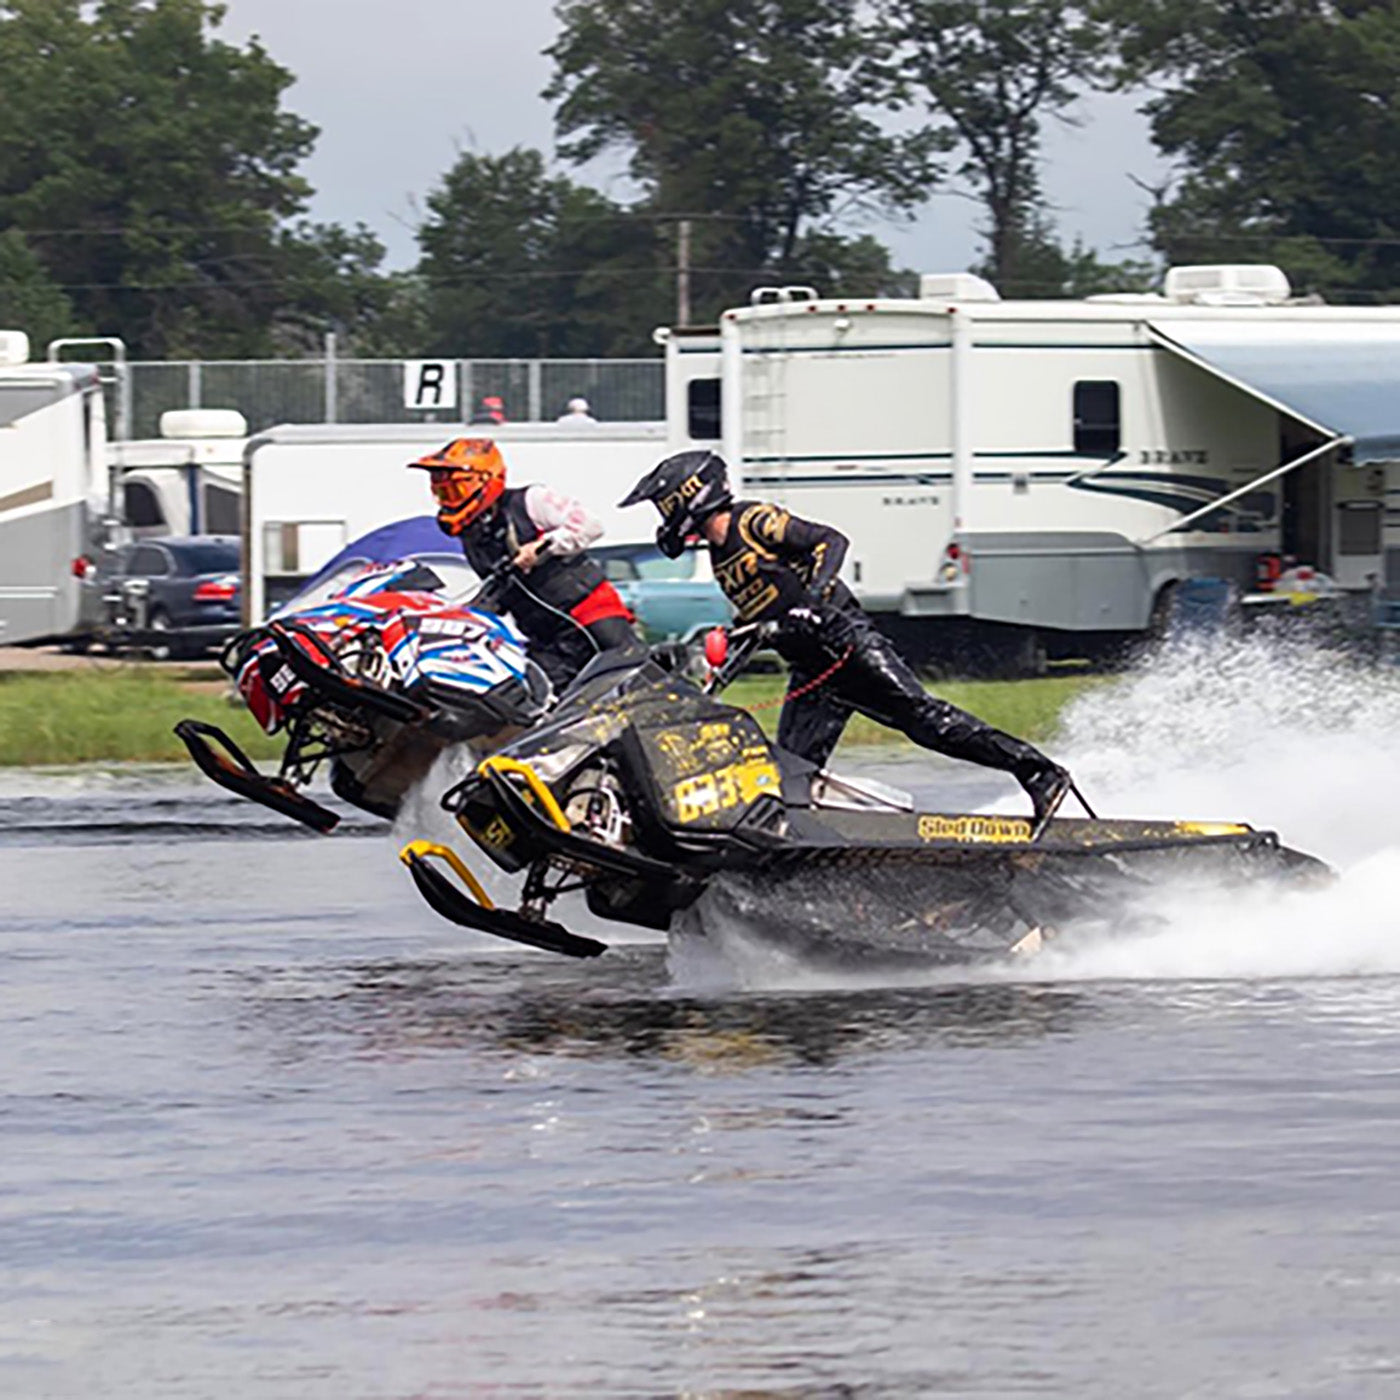 Watercross racer Bradley Barrette racing with black C&A Pro skis with yellow handles